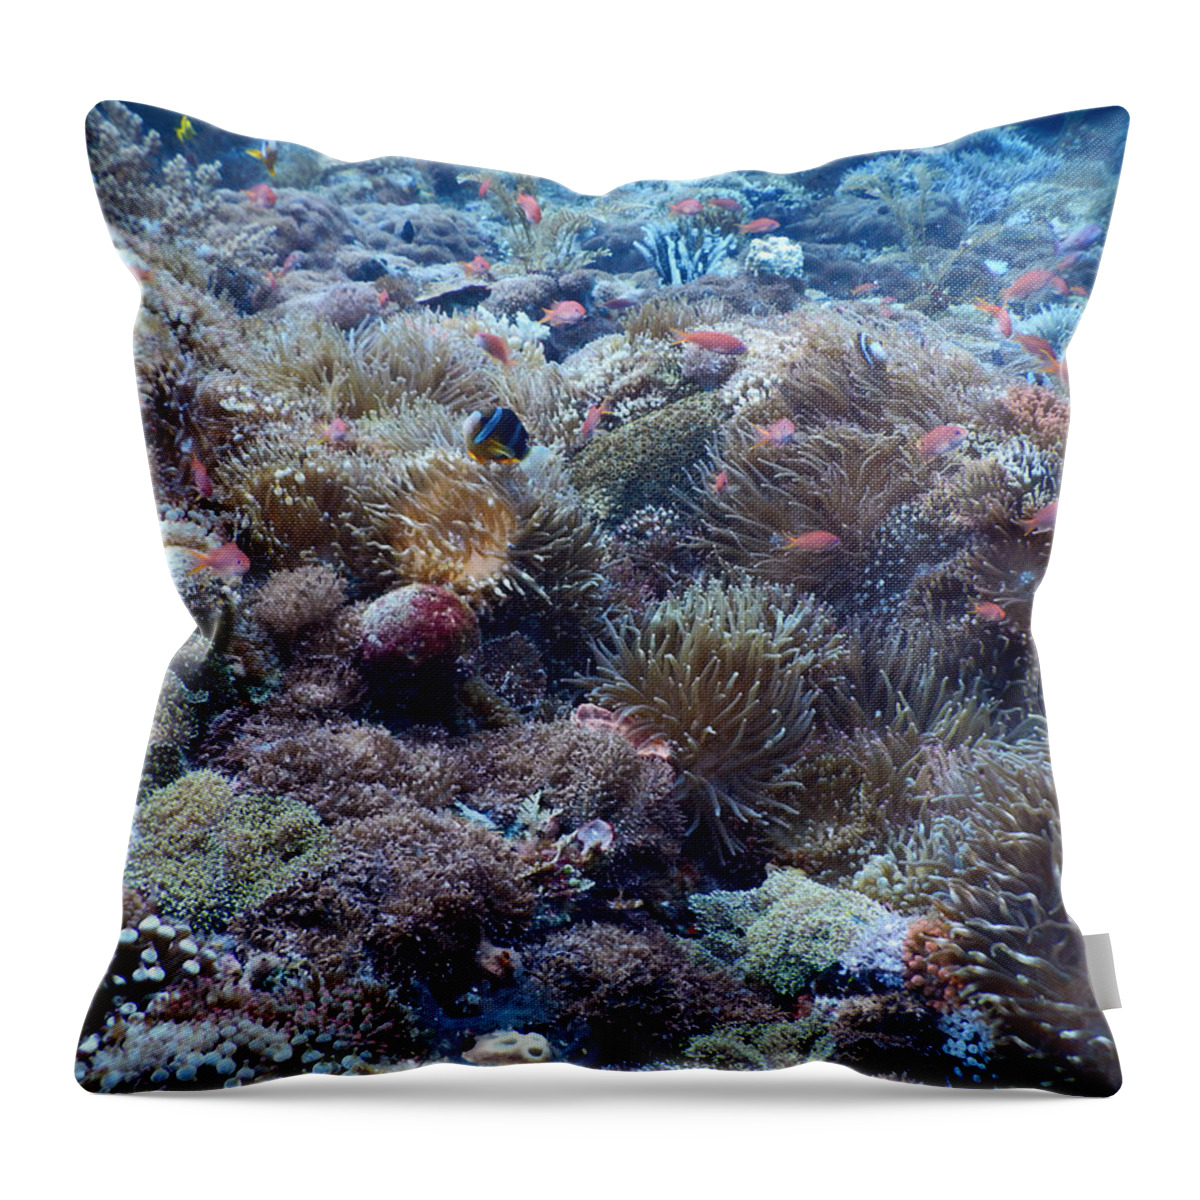 Anemone Throw Pillow featuring the photograph Coral Reef Biodiversity by Carleton Ray